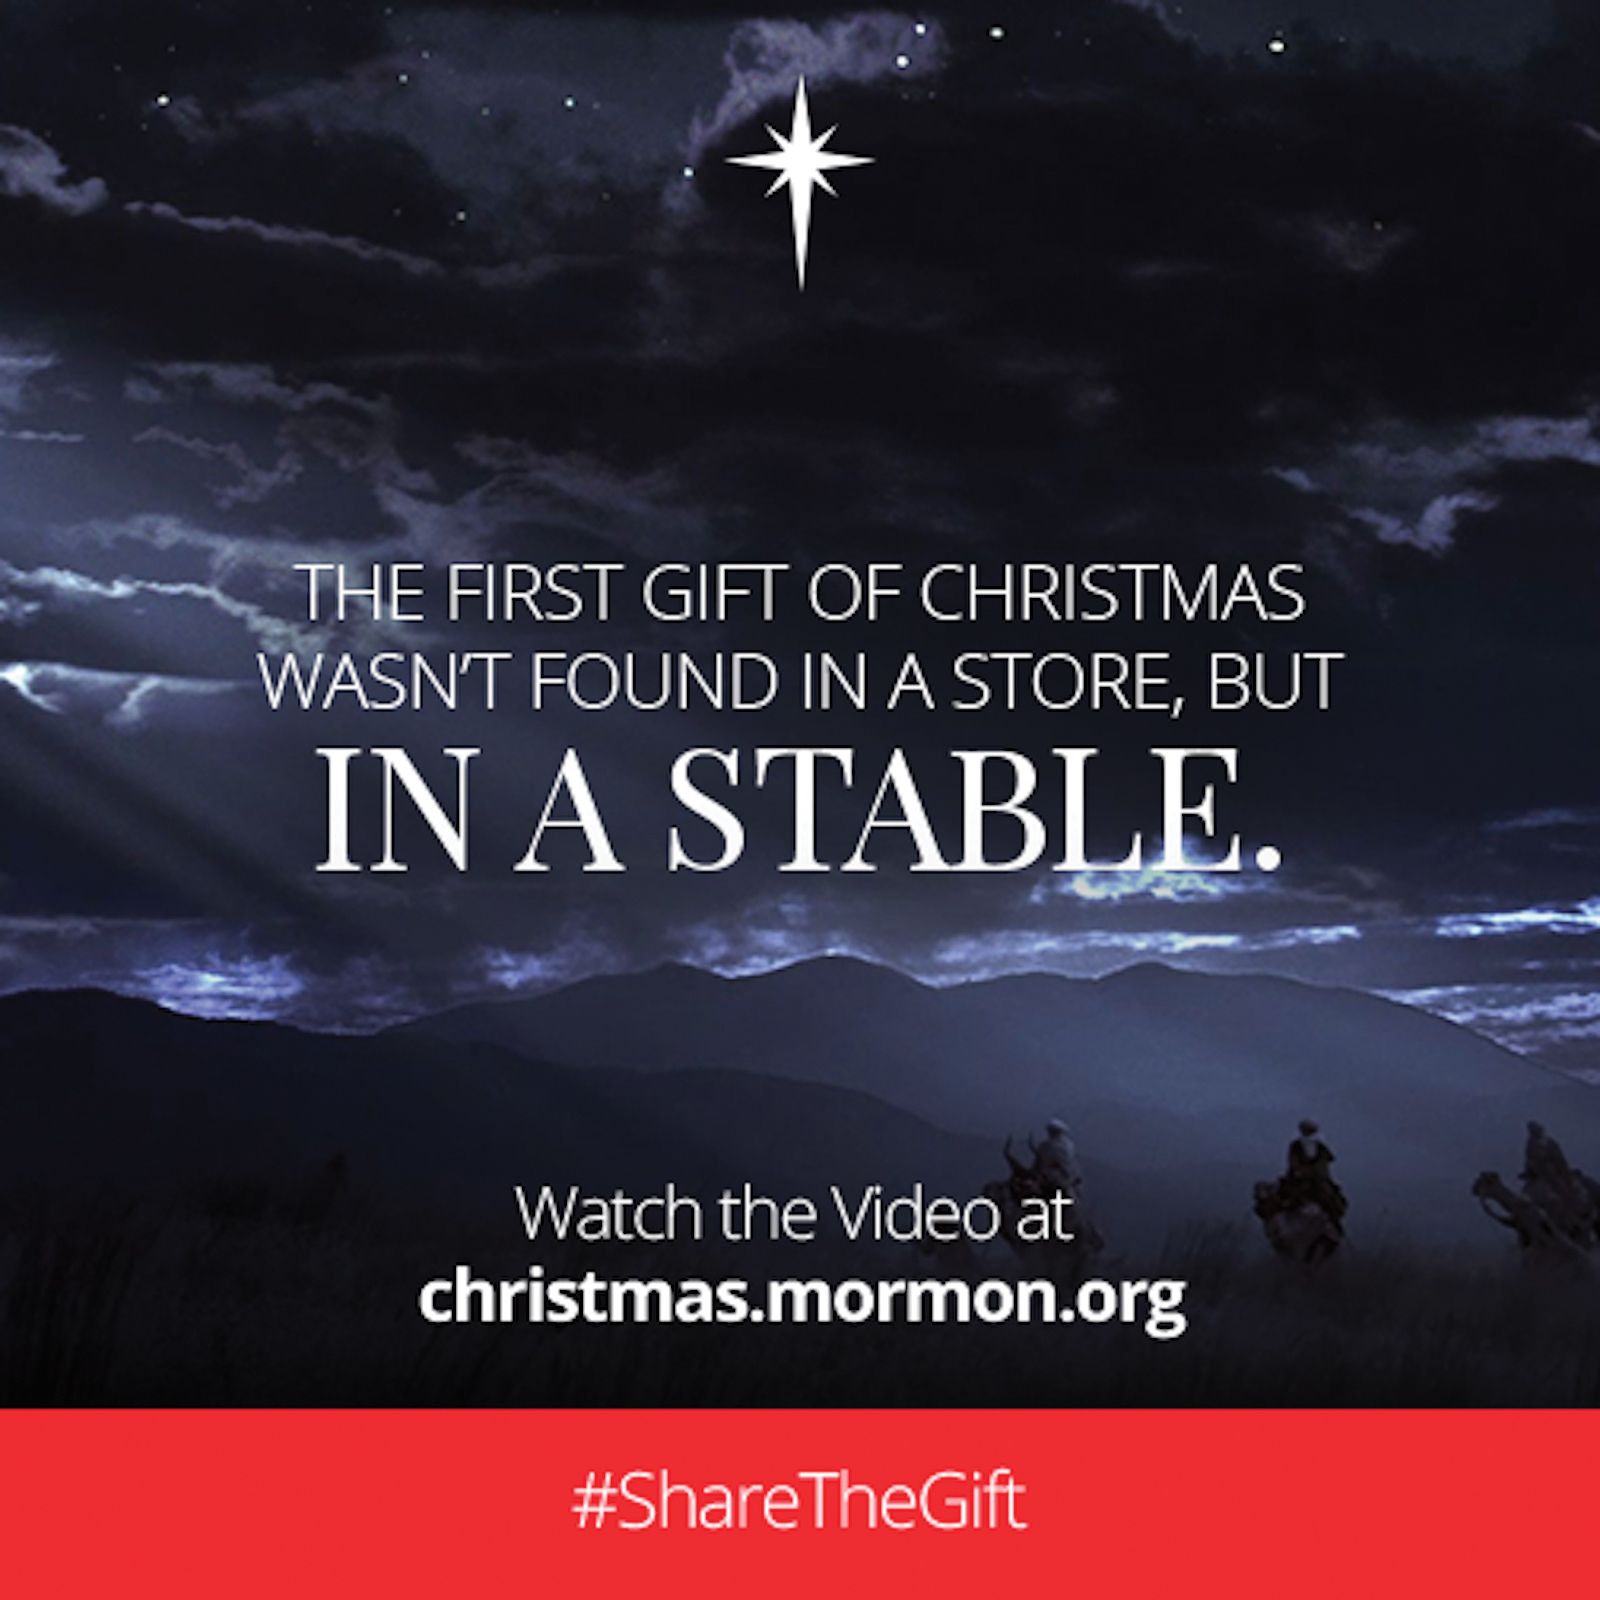 The first gift of Christmas wasn’t found in a store, but in a stable. Watch the video at christmas.mormon.org. #ShareTheGift